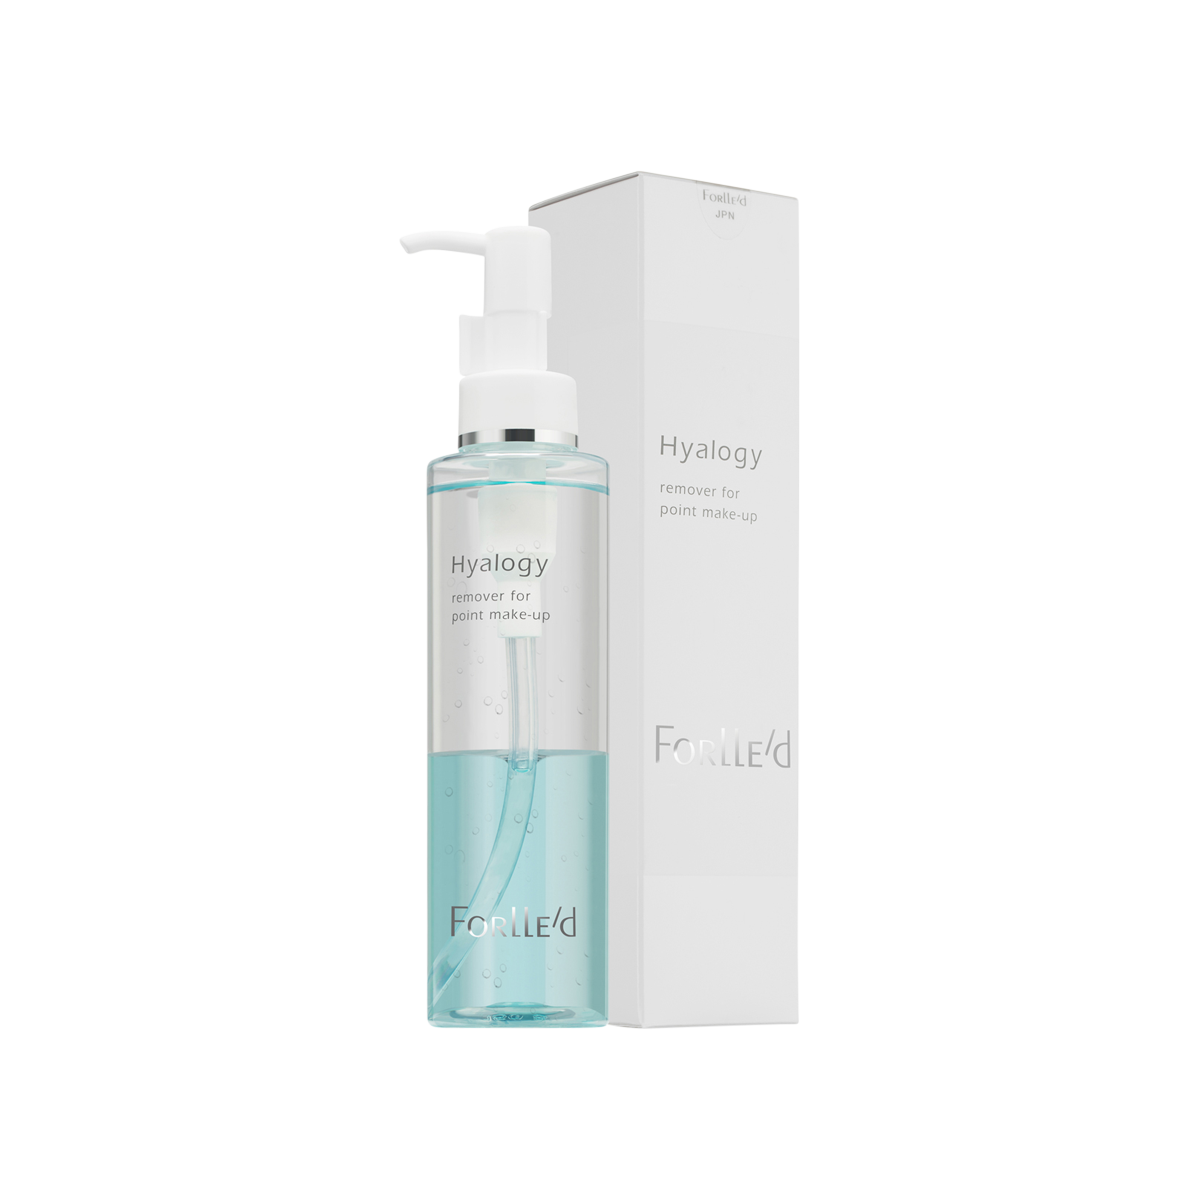 Forlle'd - Hyalogy Remover For Point Make-Up